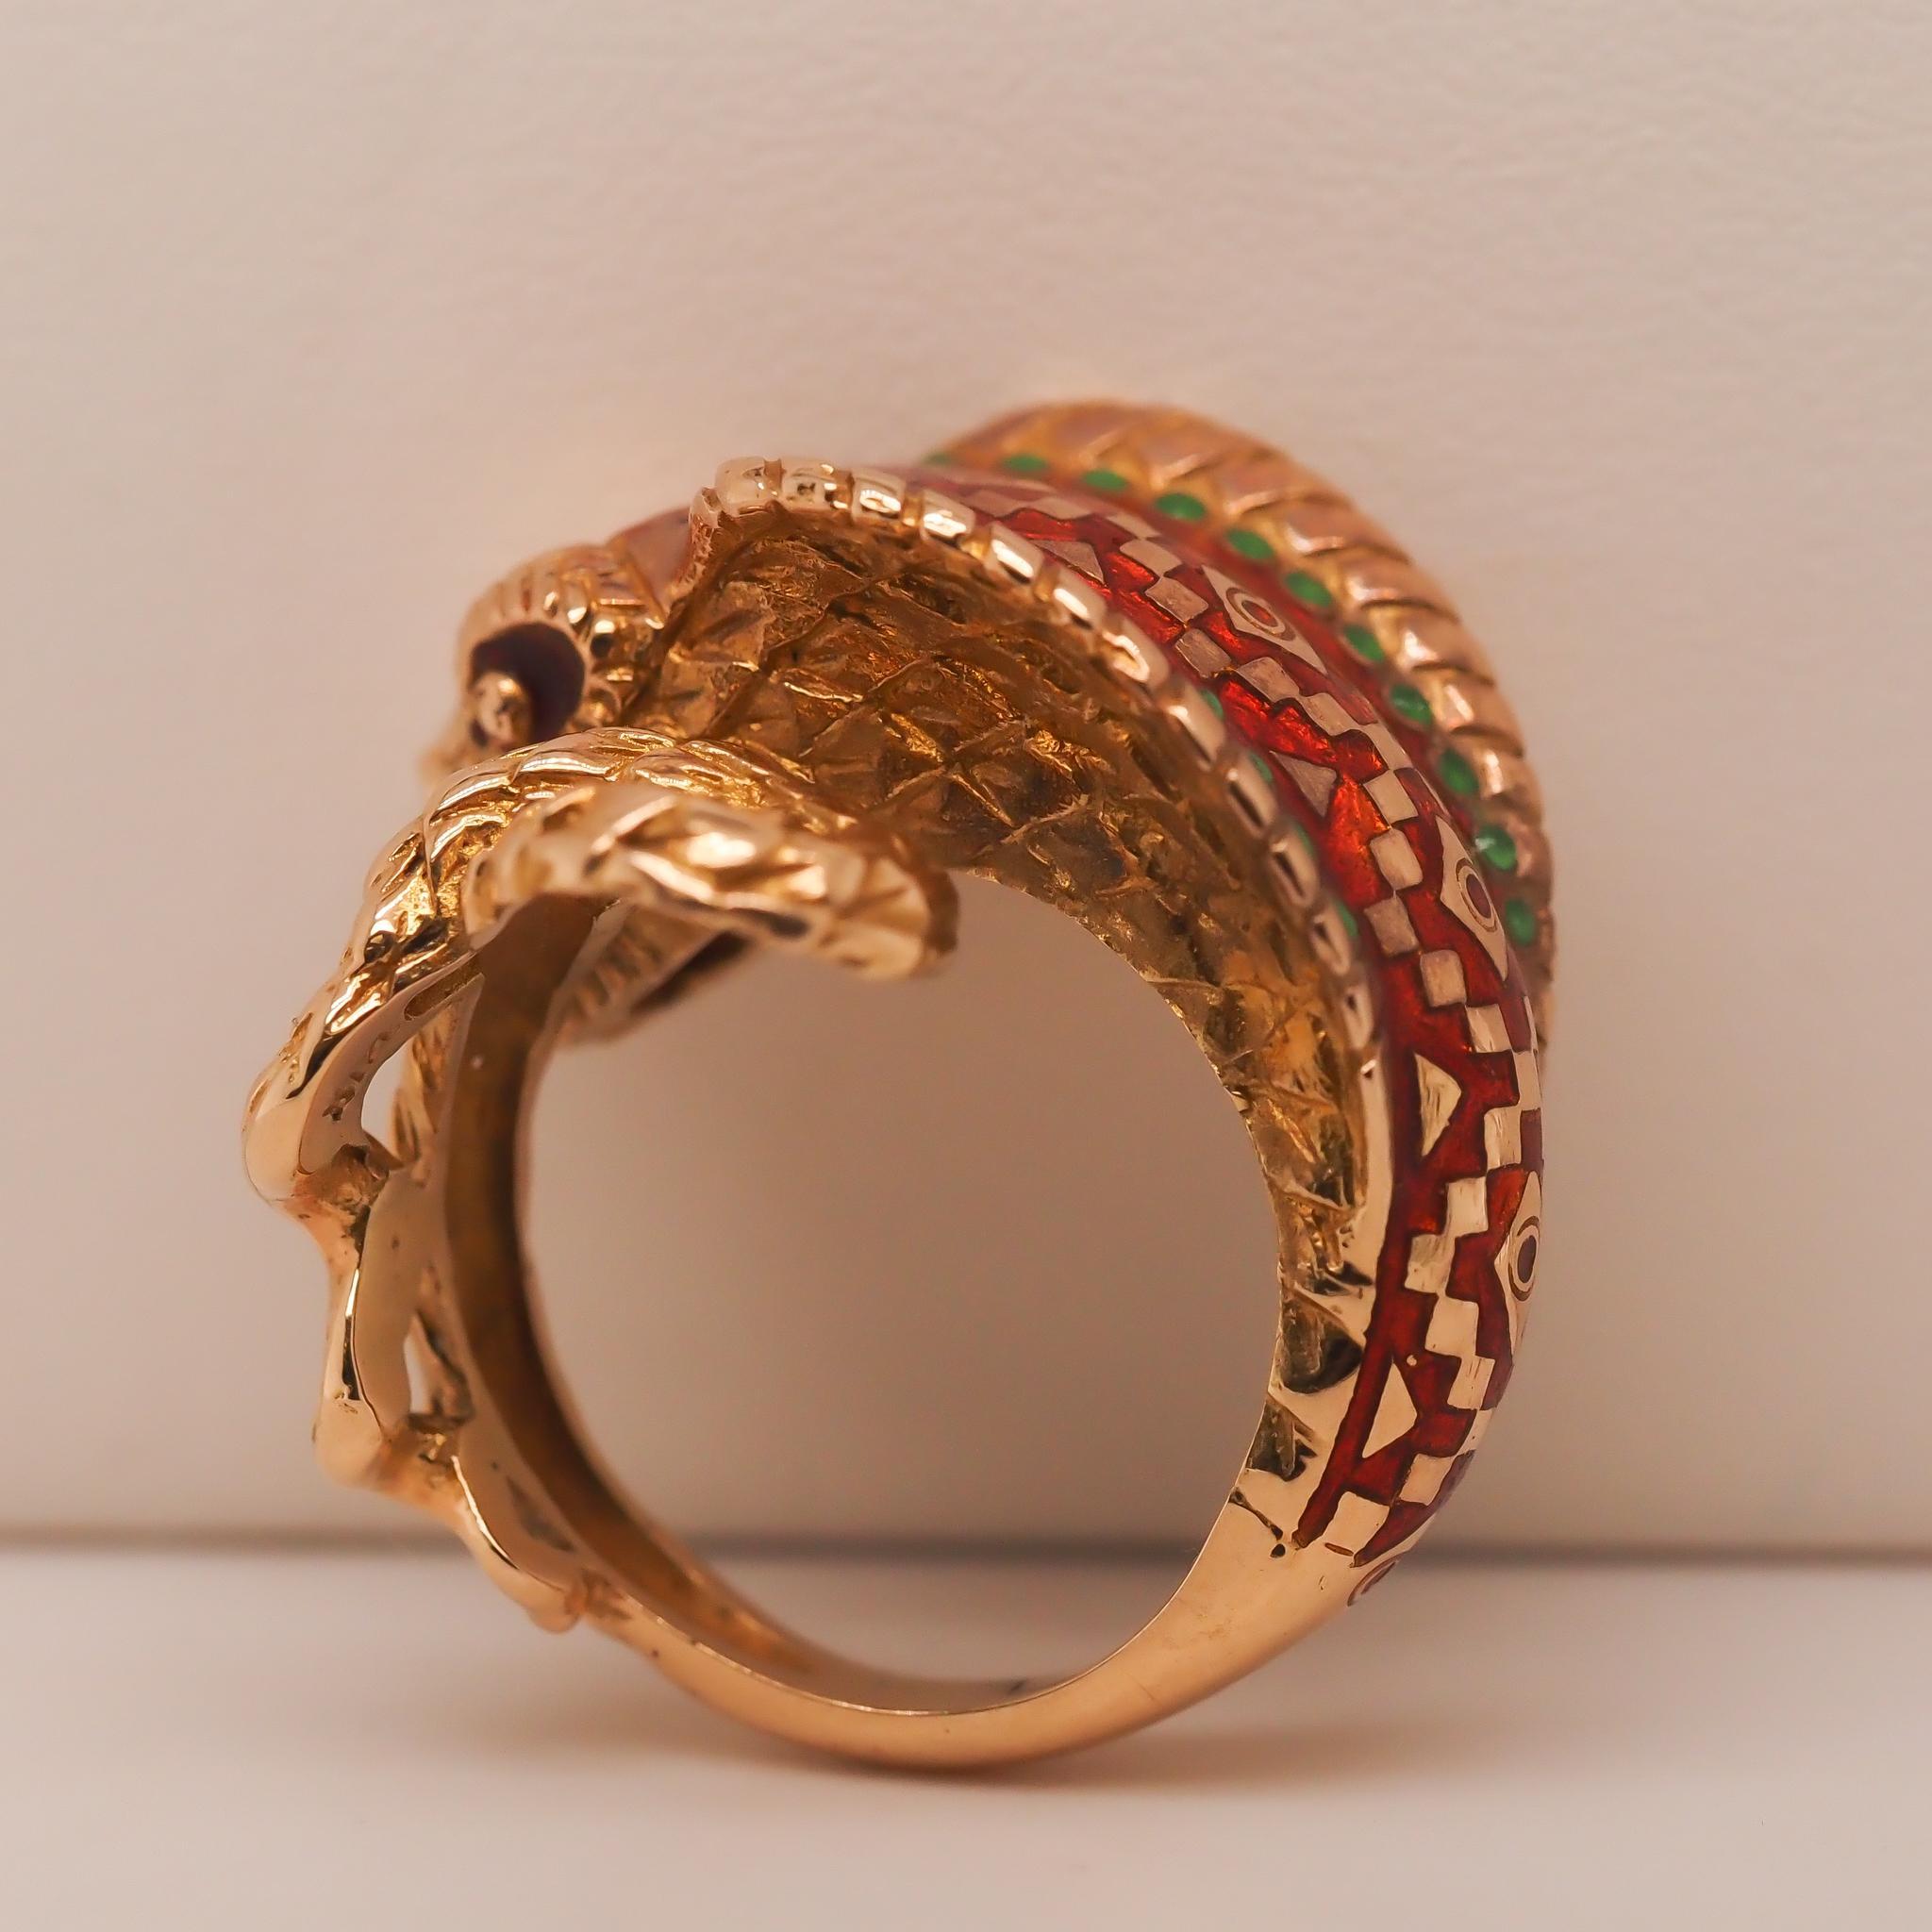 Year: 1940s
Item Details:
Ring Size: 7 (Sizable)
Metal Type: 18K Yellow Gold [Hallmarked, and Tested]
Weight: 13.5 grams
Enamel: Red, Gold and Green colors.
Band Width: 4.20 mm
Condition: Excellent
Era: Vintage